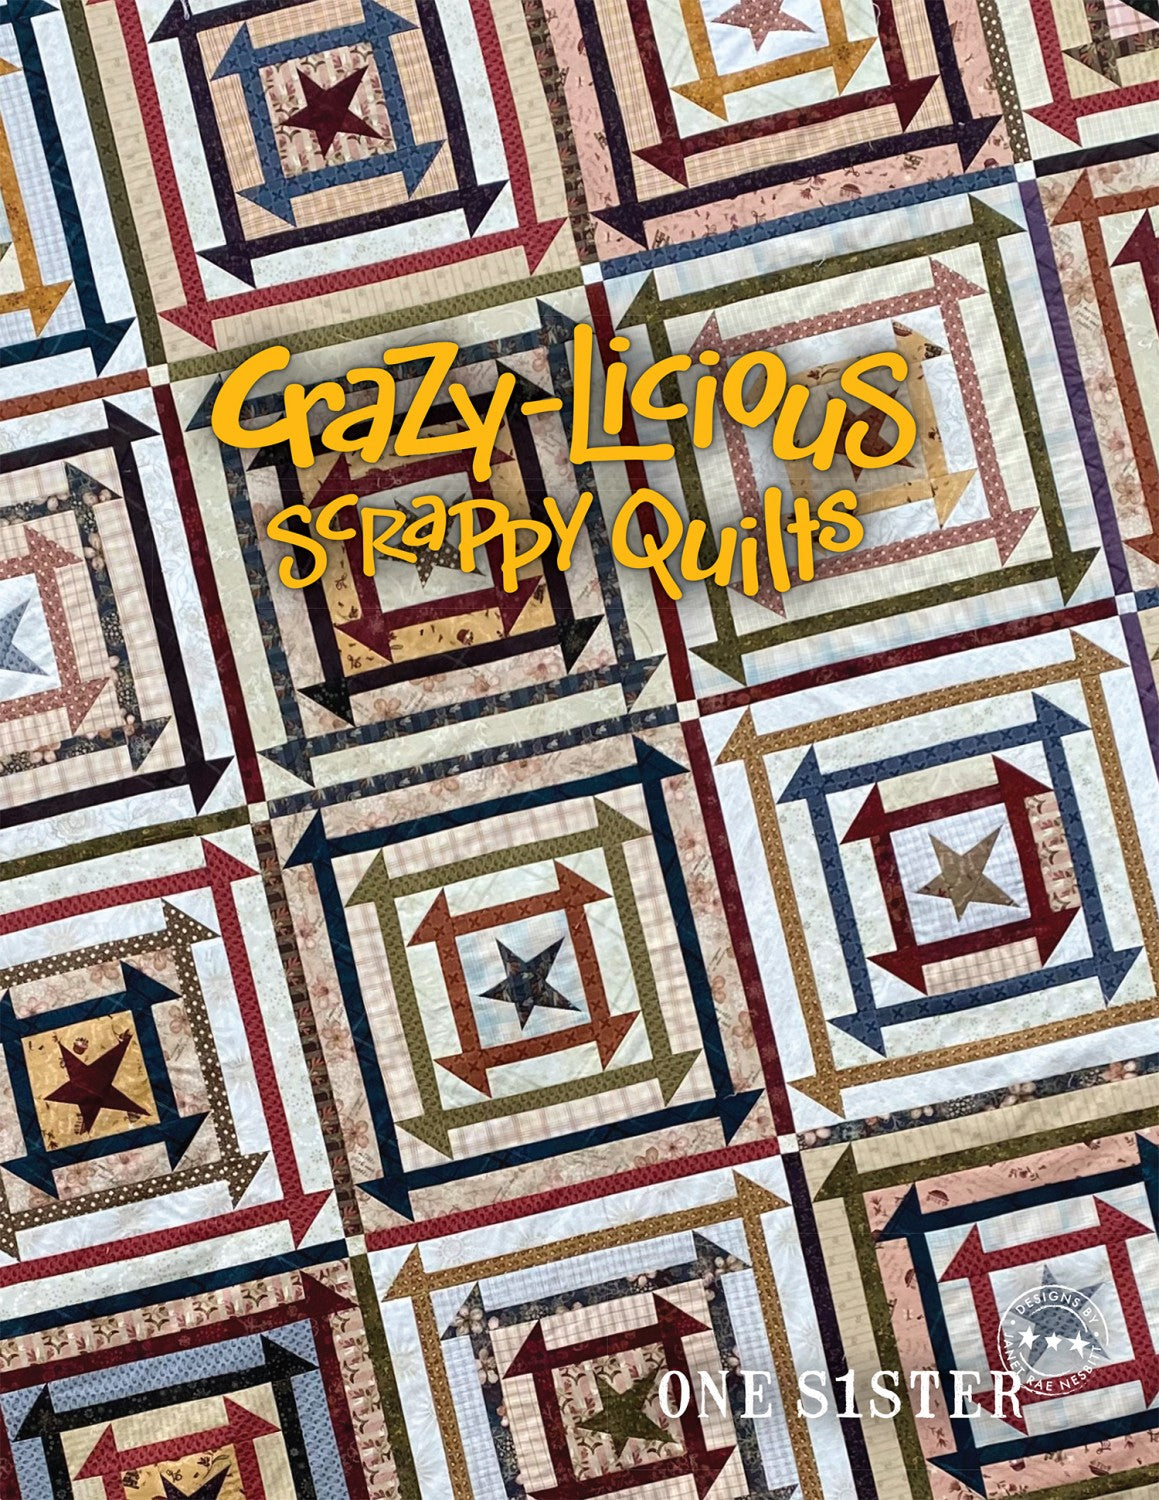 Crazy-Licious Scrappy Quilts Pattern Book by Janet Nesbitt of One Sister Designs